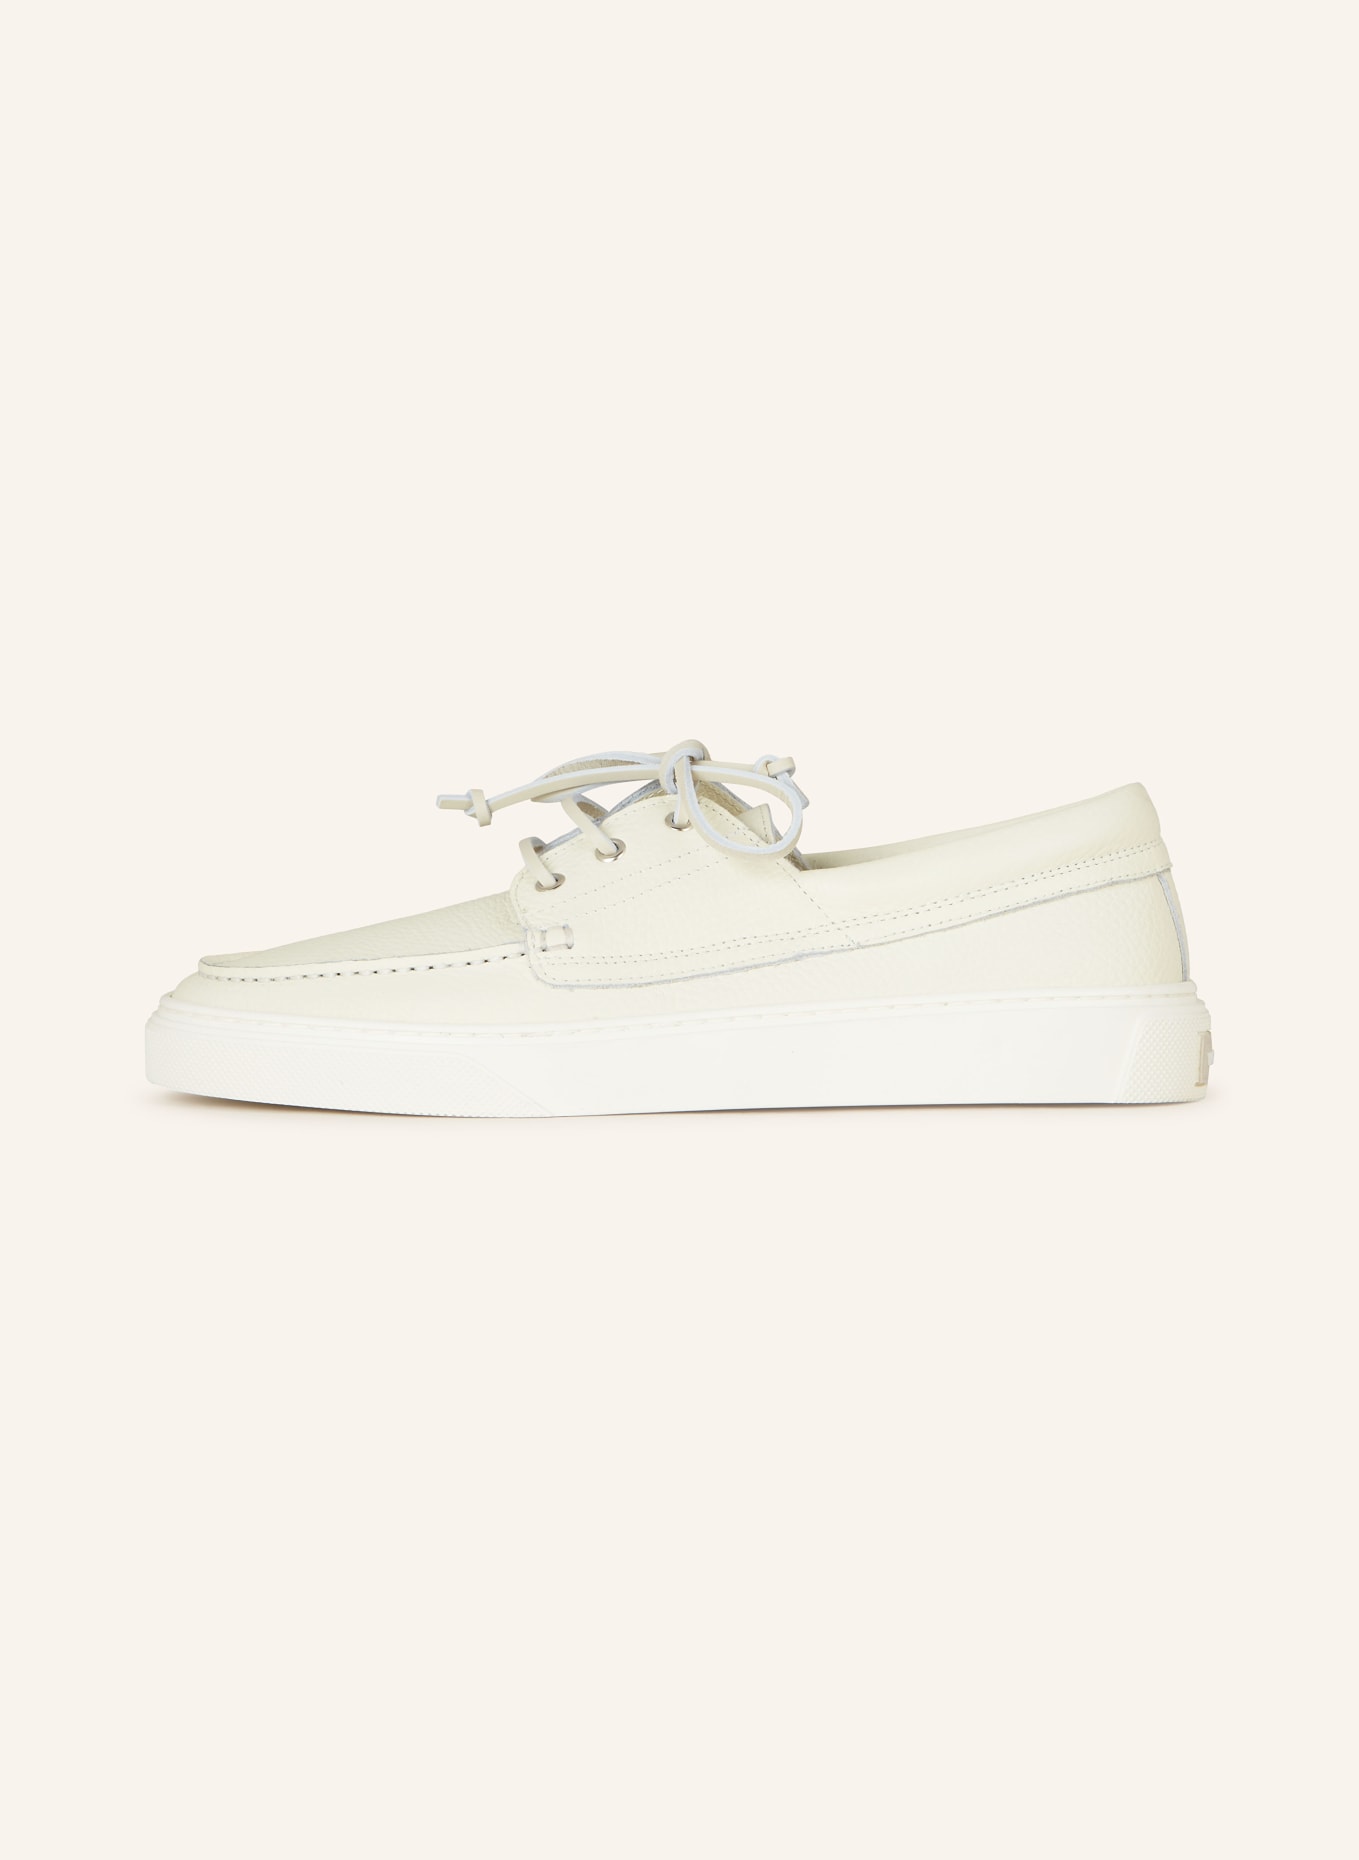 WOOLRICH Slip-ons GRANA, Color: CREMA (Image 4)